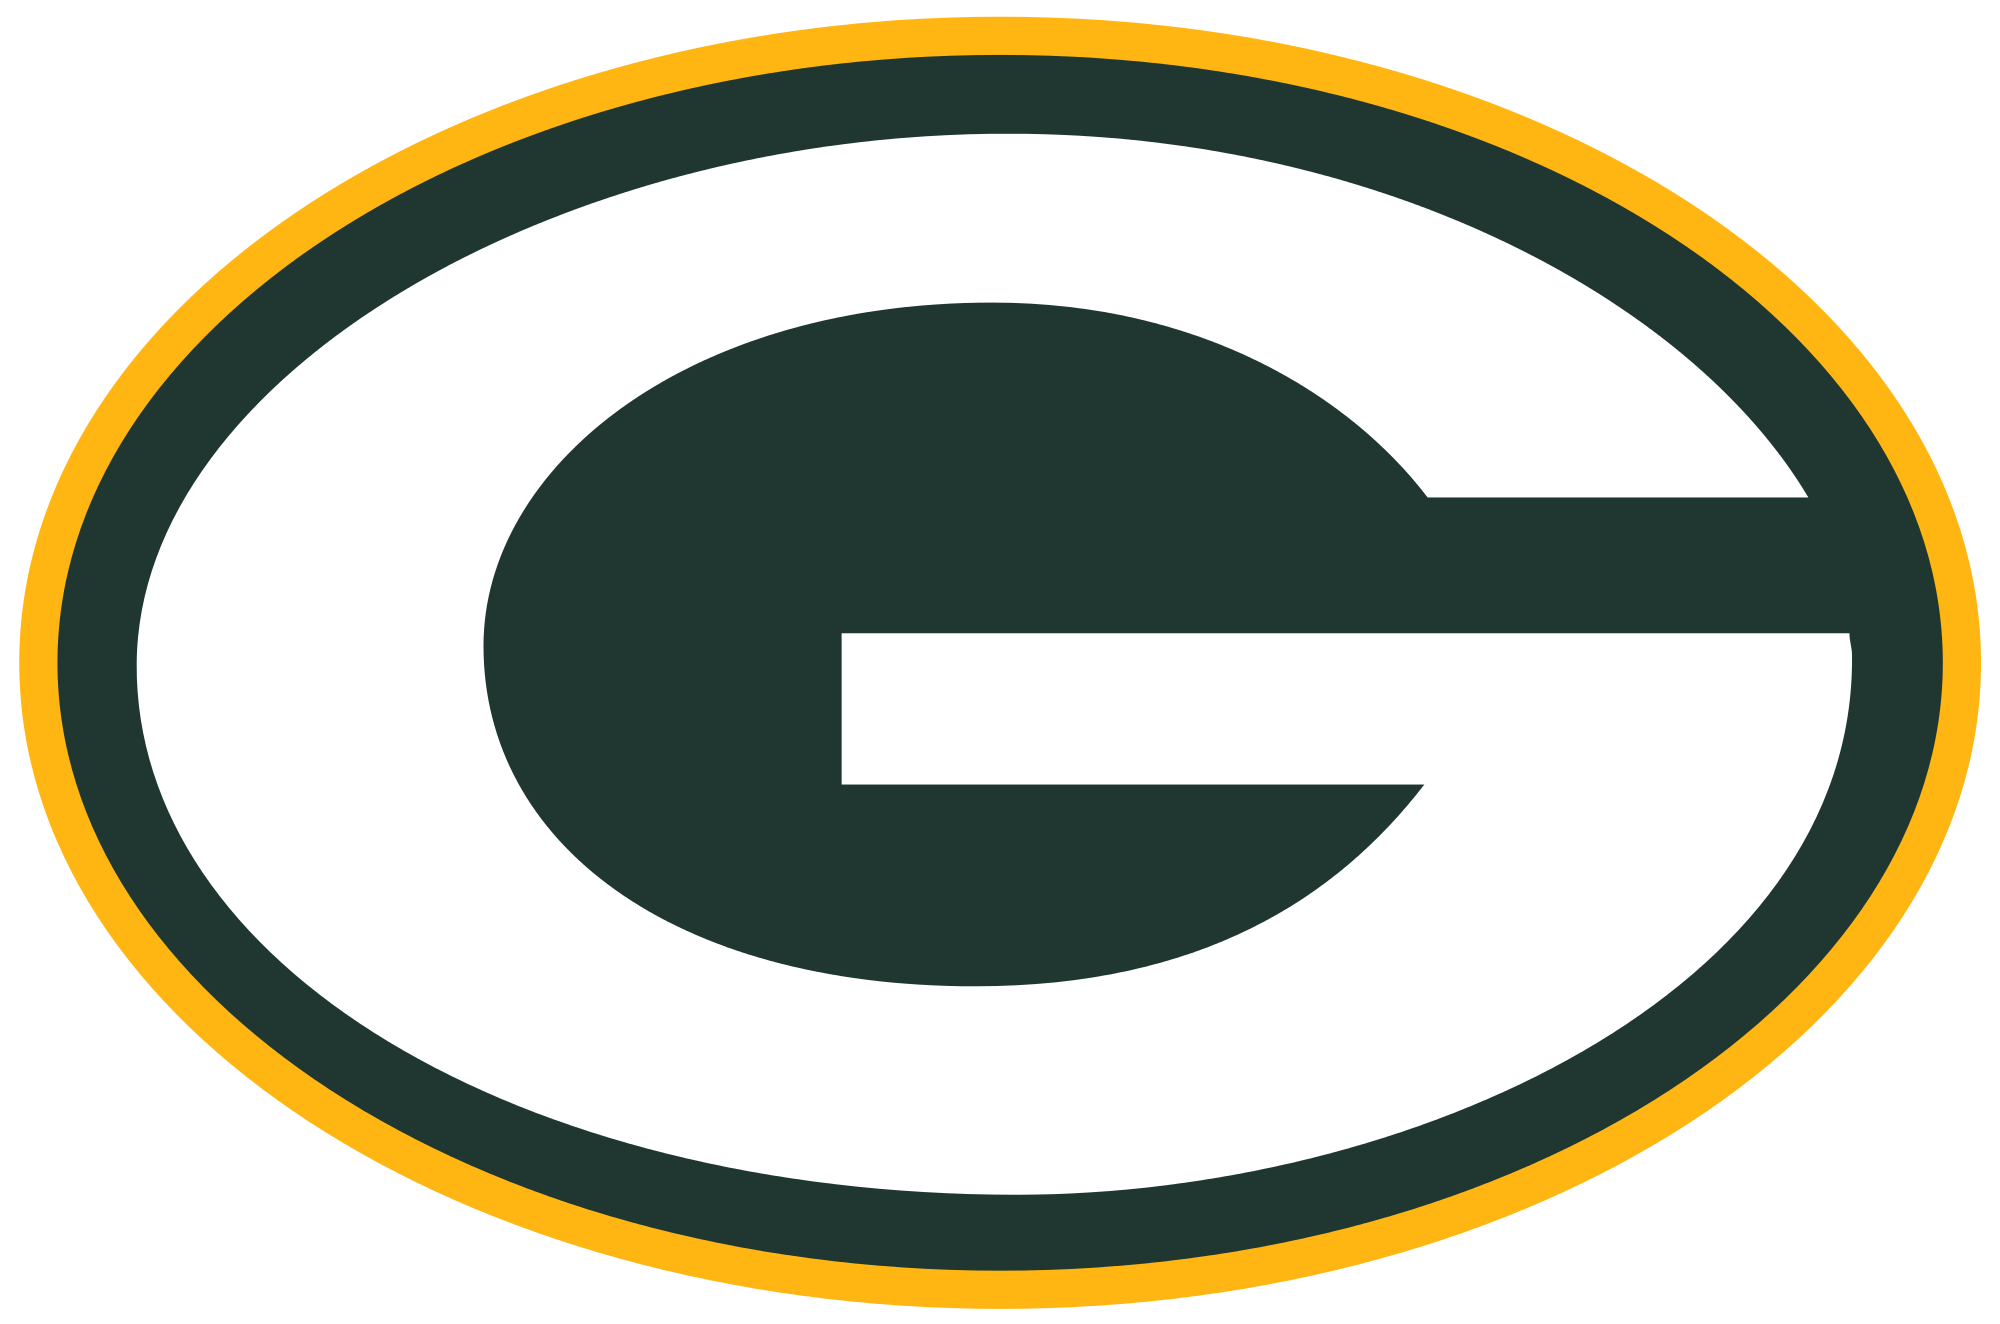 Green Bay Packers Symbol - ClipArt Best